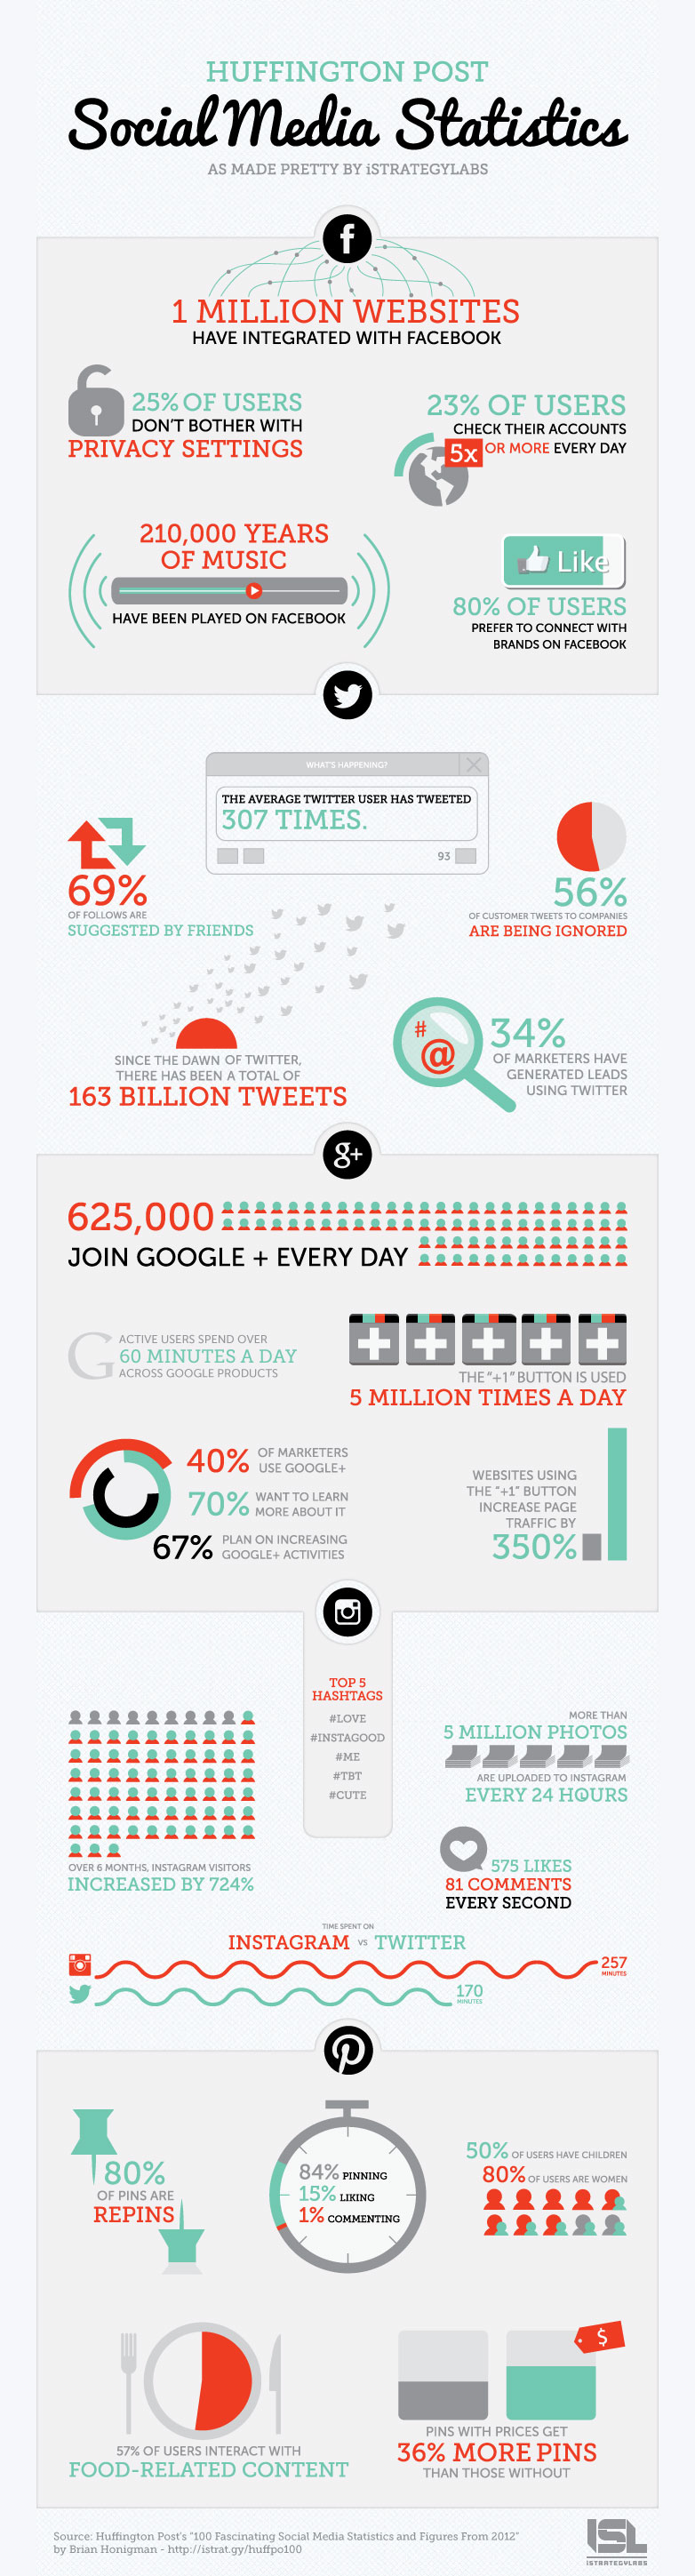 This beautiful infographic shows some incredible statistics in social media.